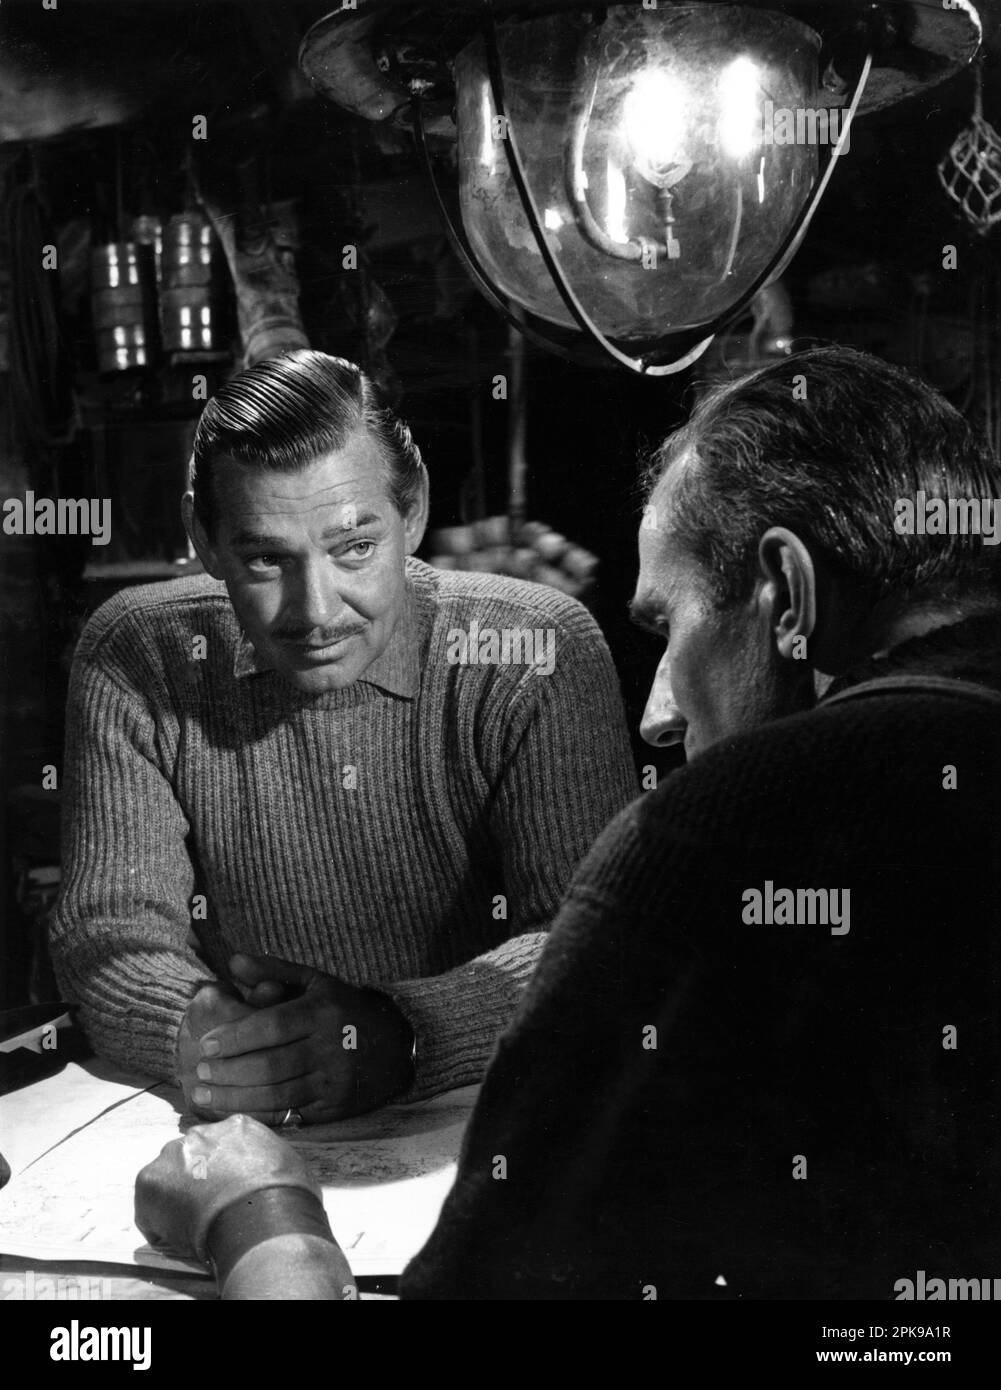 CLARK GABLE and BERNARD MILES in NEVER LET ME GO 1953 director DELMER DAVES from novel Come The Dawn by Paul Winterton producer Clarence Brown Metro Goldwyn Mayer Stock Photo